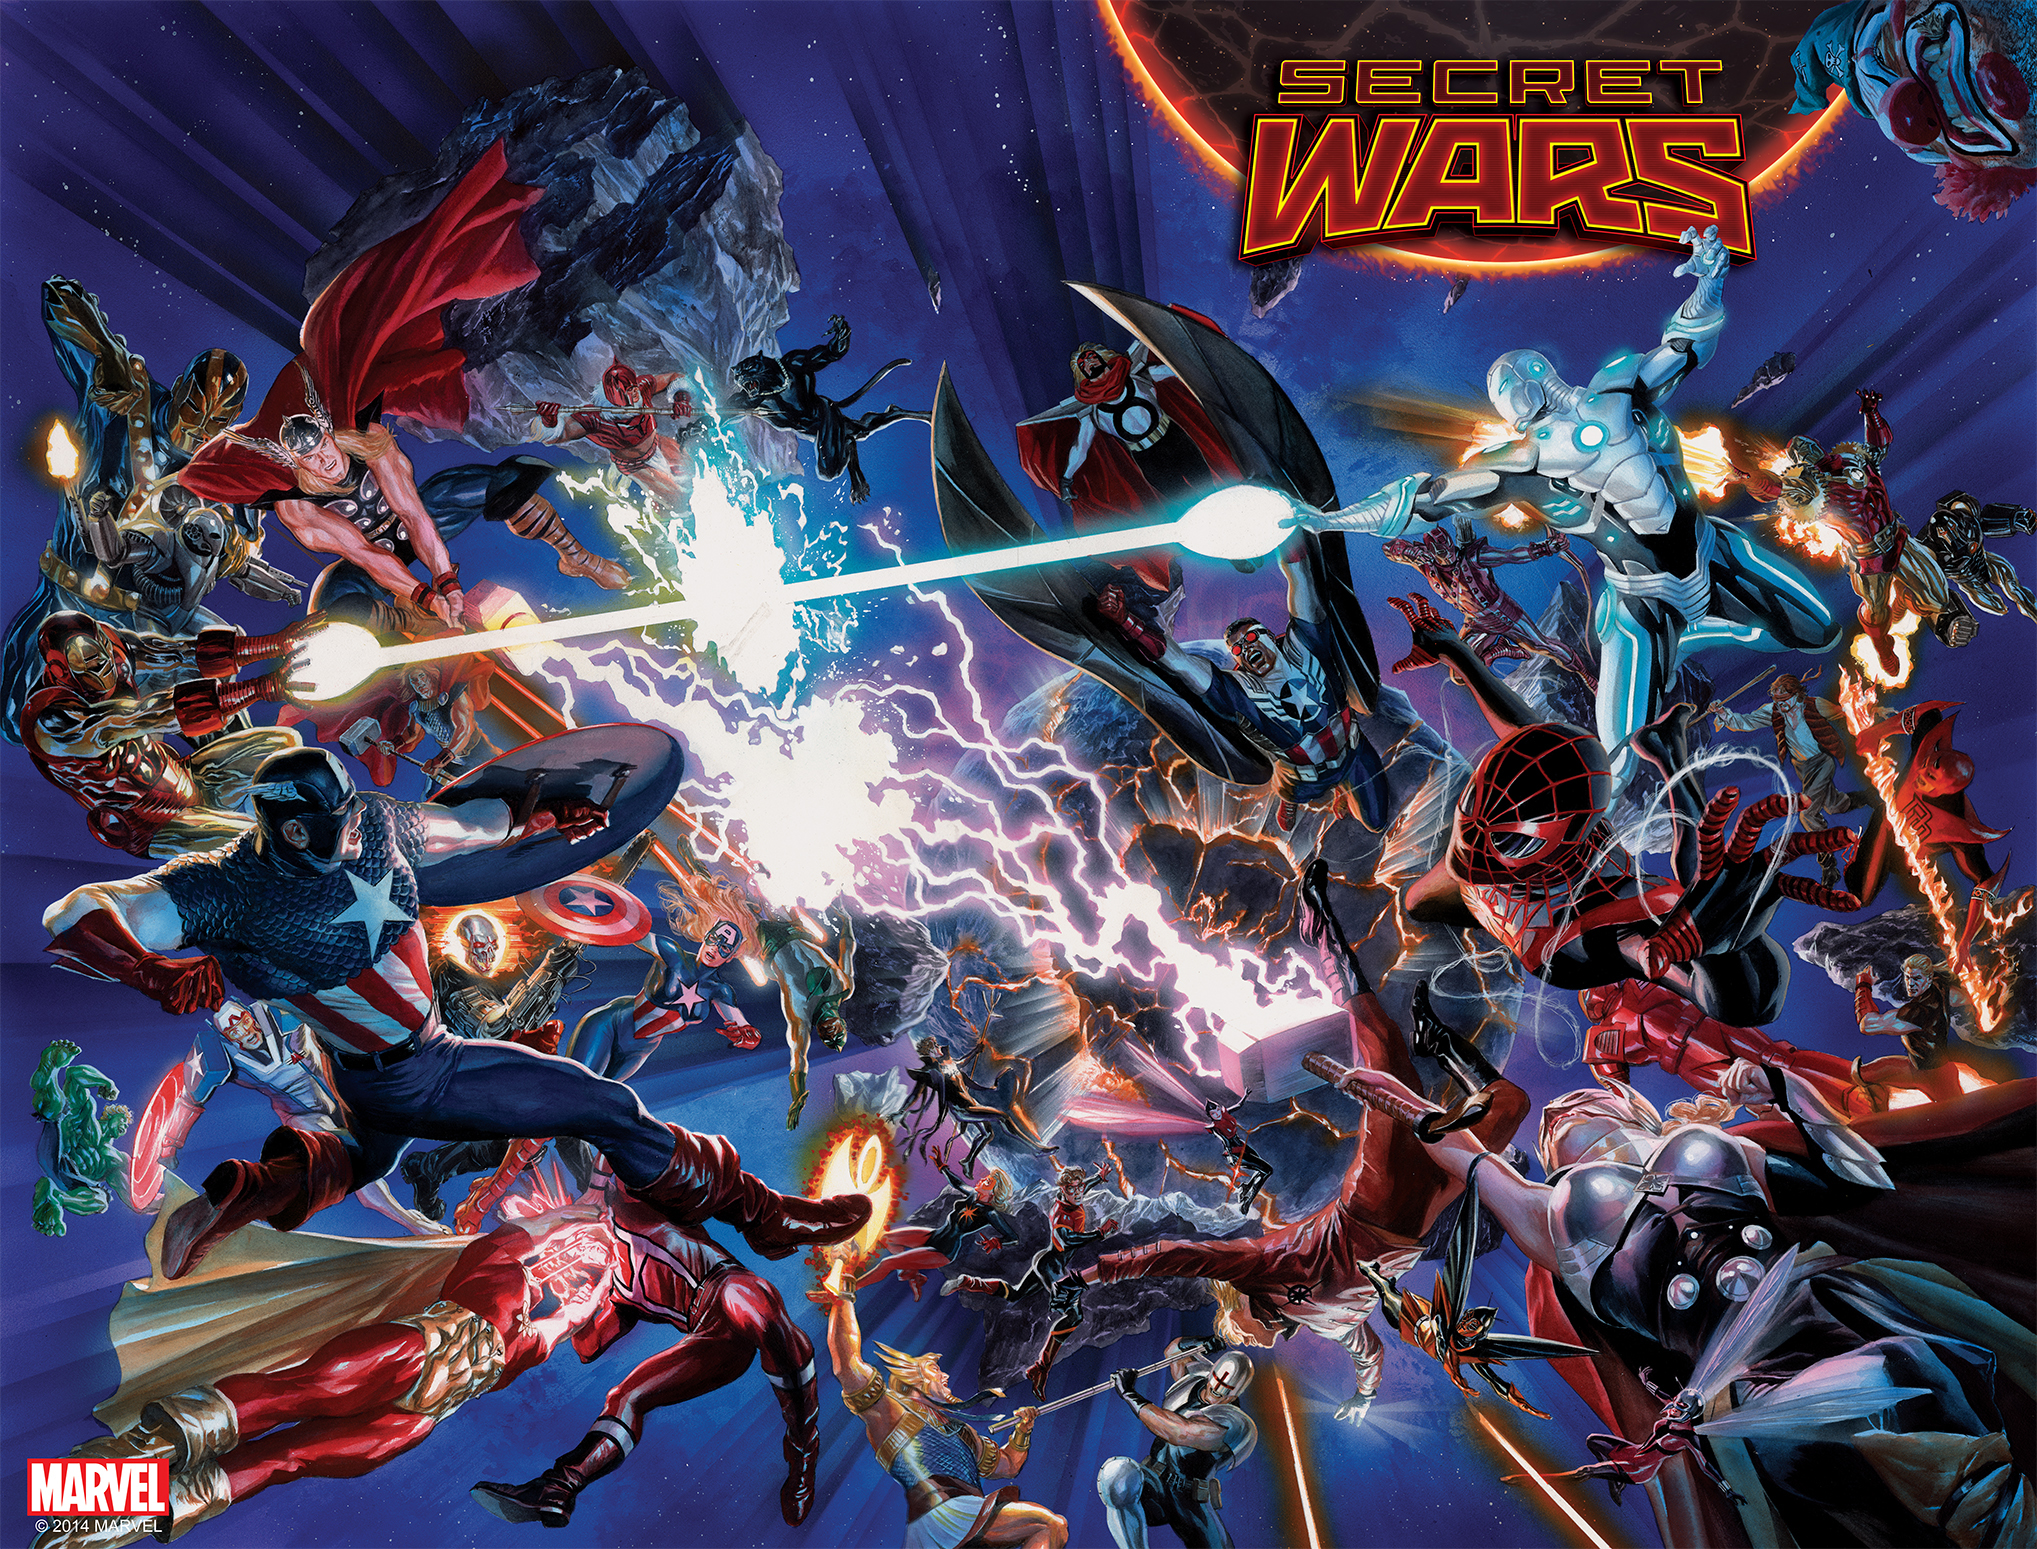 Secret Wars Explained: What To Expect From The Multiverse Saga's